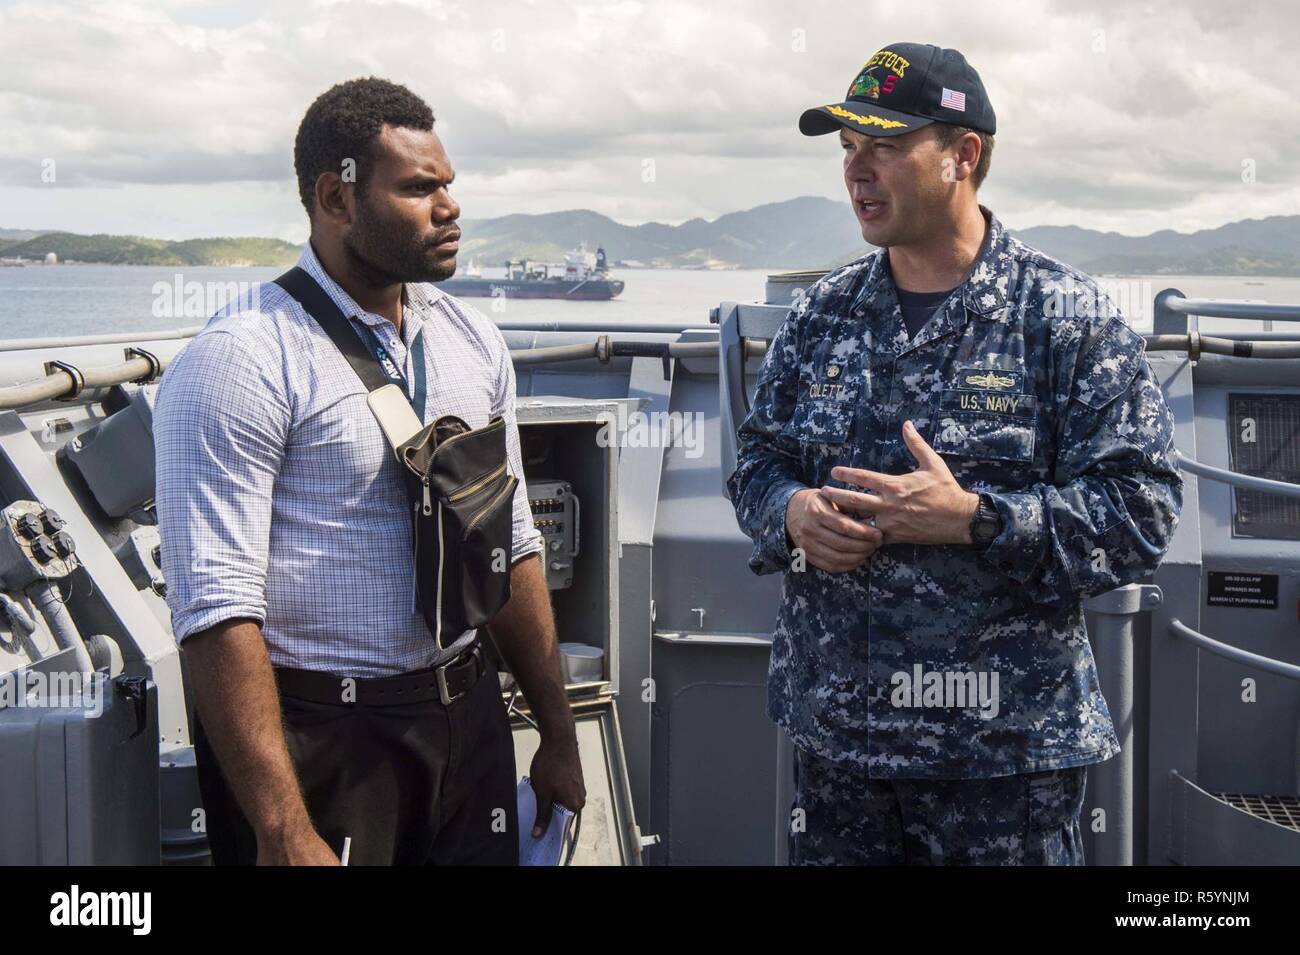 PORT MORESBY, Papua New Guinea (April 18, 2017) Cmdr. Bradley Coletti, right, commanding officer of the amphibious dock landing ship USS Comstock (LSD 45), speaks with a member of the media on the bridge wing during the ship’s visit to Papua New Guinea. Comstock, with the embarked 11th Marine Expeditionary Unit (11th MEU), is in Port Moresby to conduct activities and training that will enhance U.S.-Papua New Guinea relations as the two nations work together for a stable and prosperous Asia-Pacific region. Stock Photo